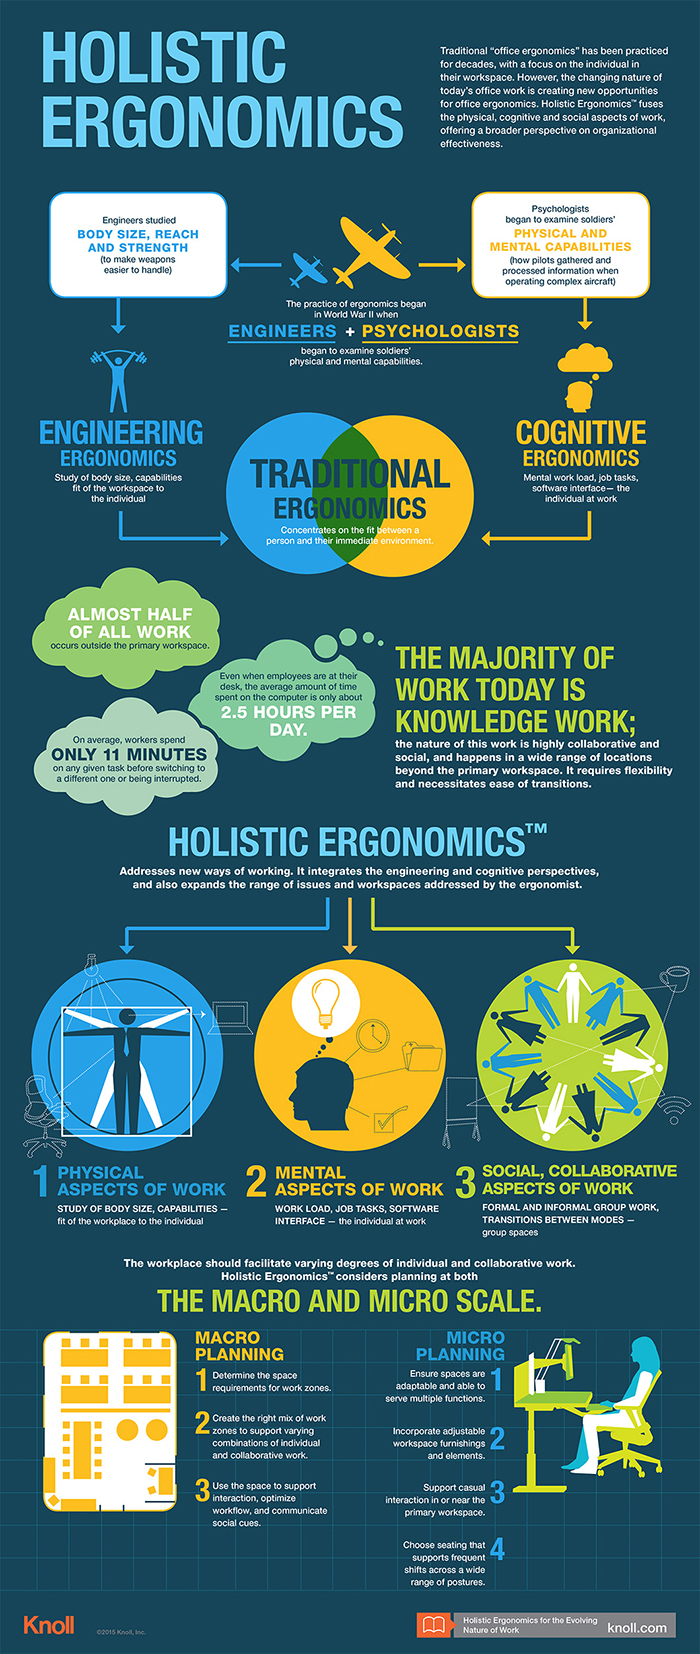 Holistic Ergonomics | Infographic | Knoll Workplace Research | Inspiration